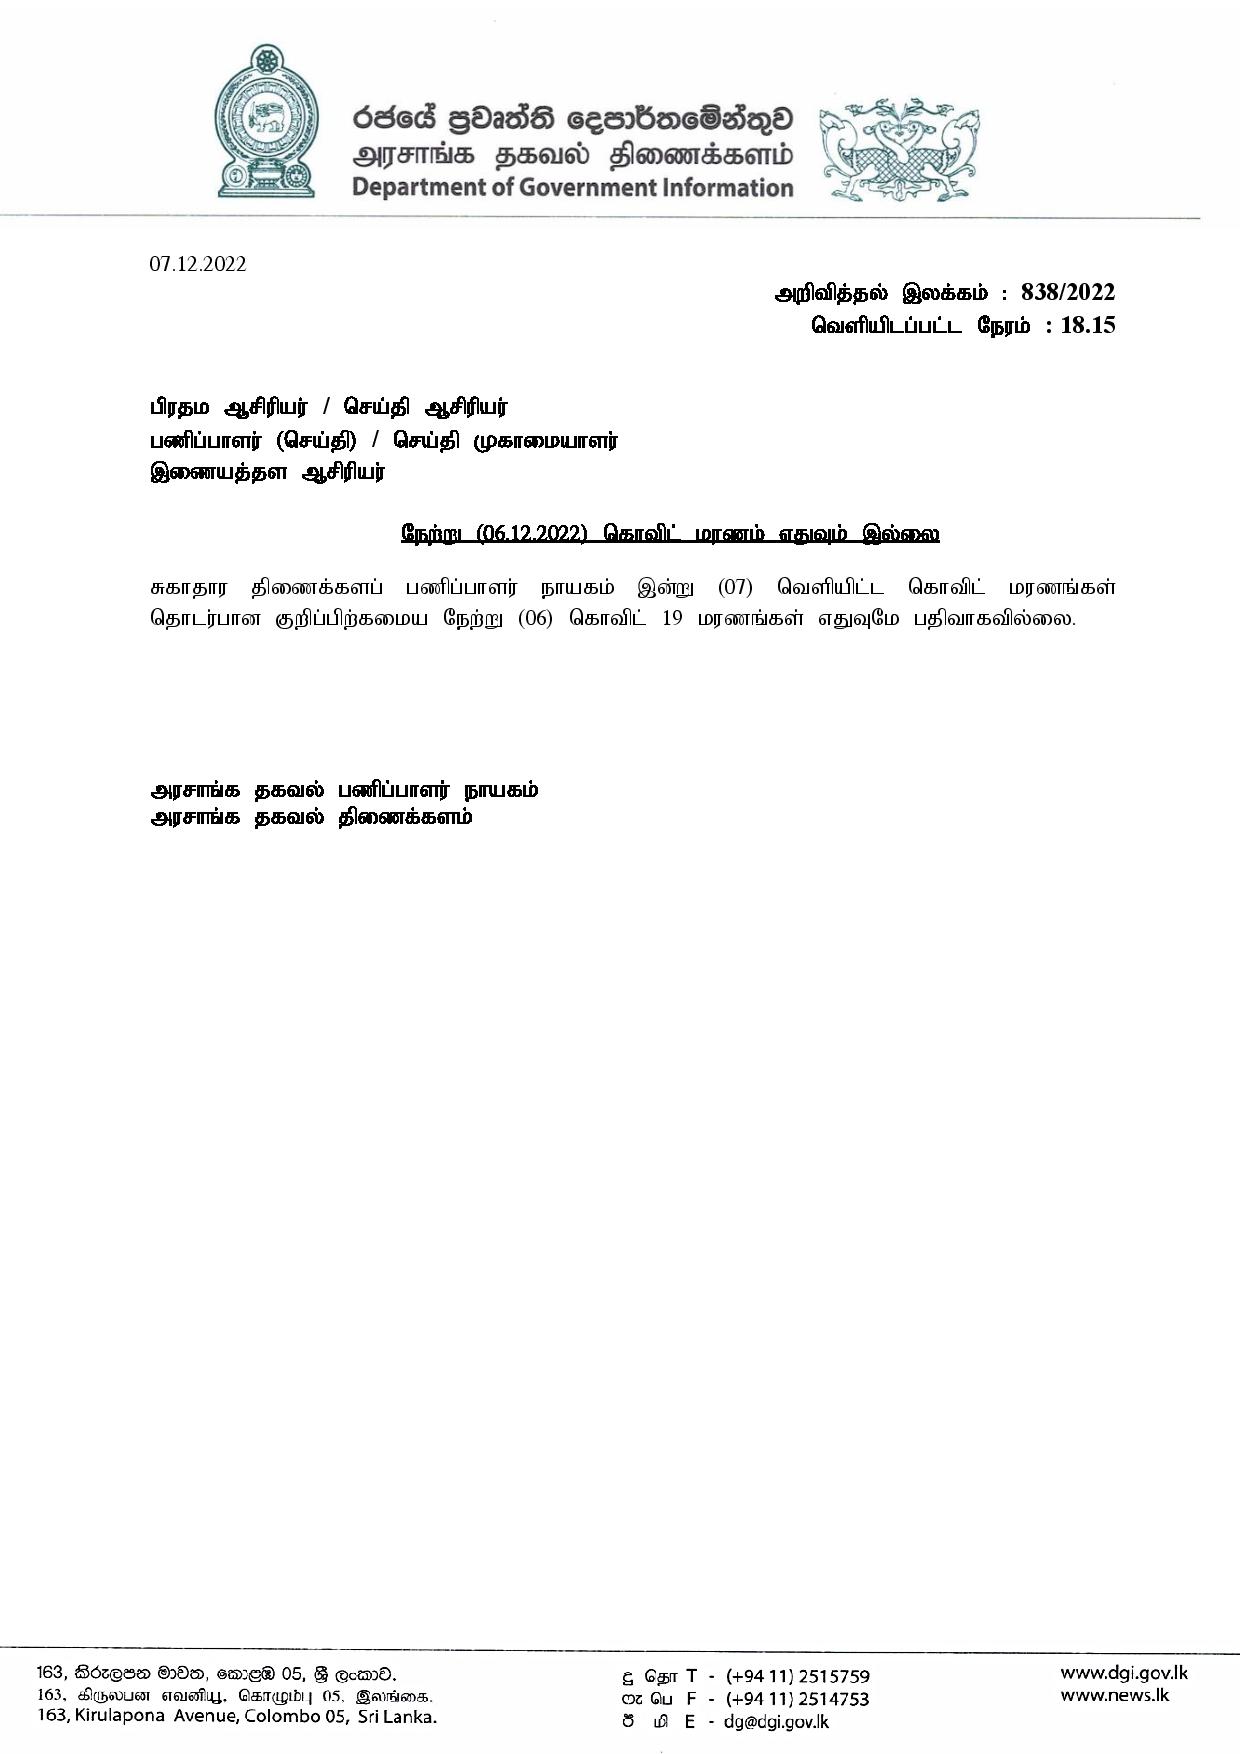 Release No 838 Tamil page 001